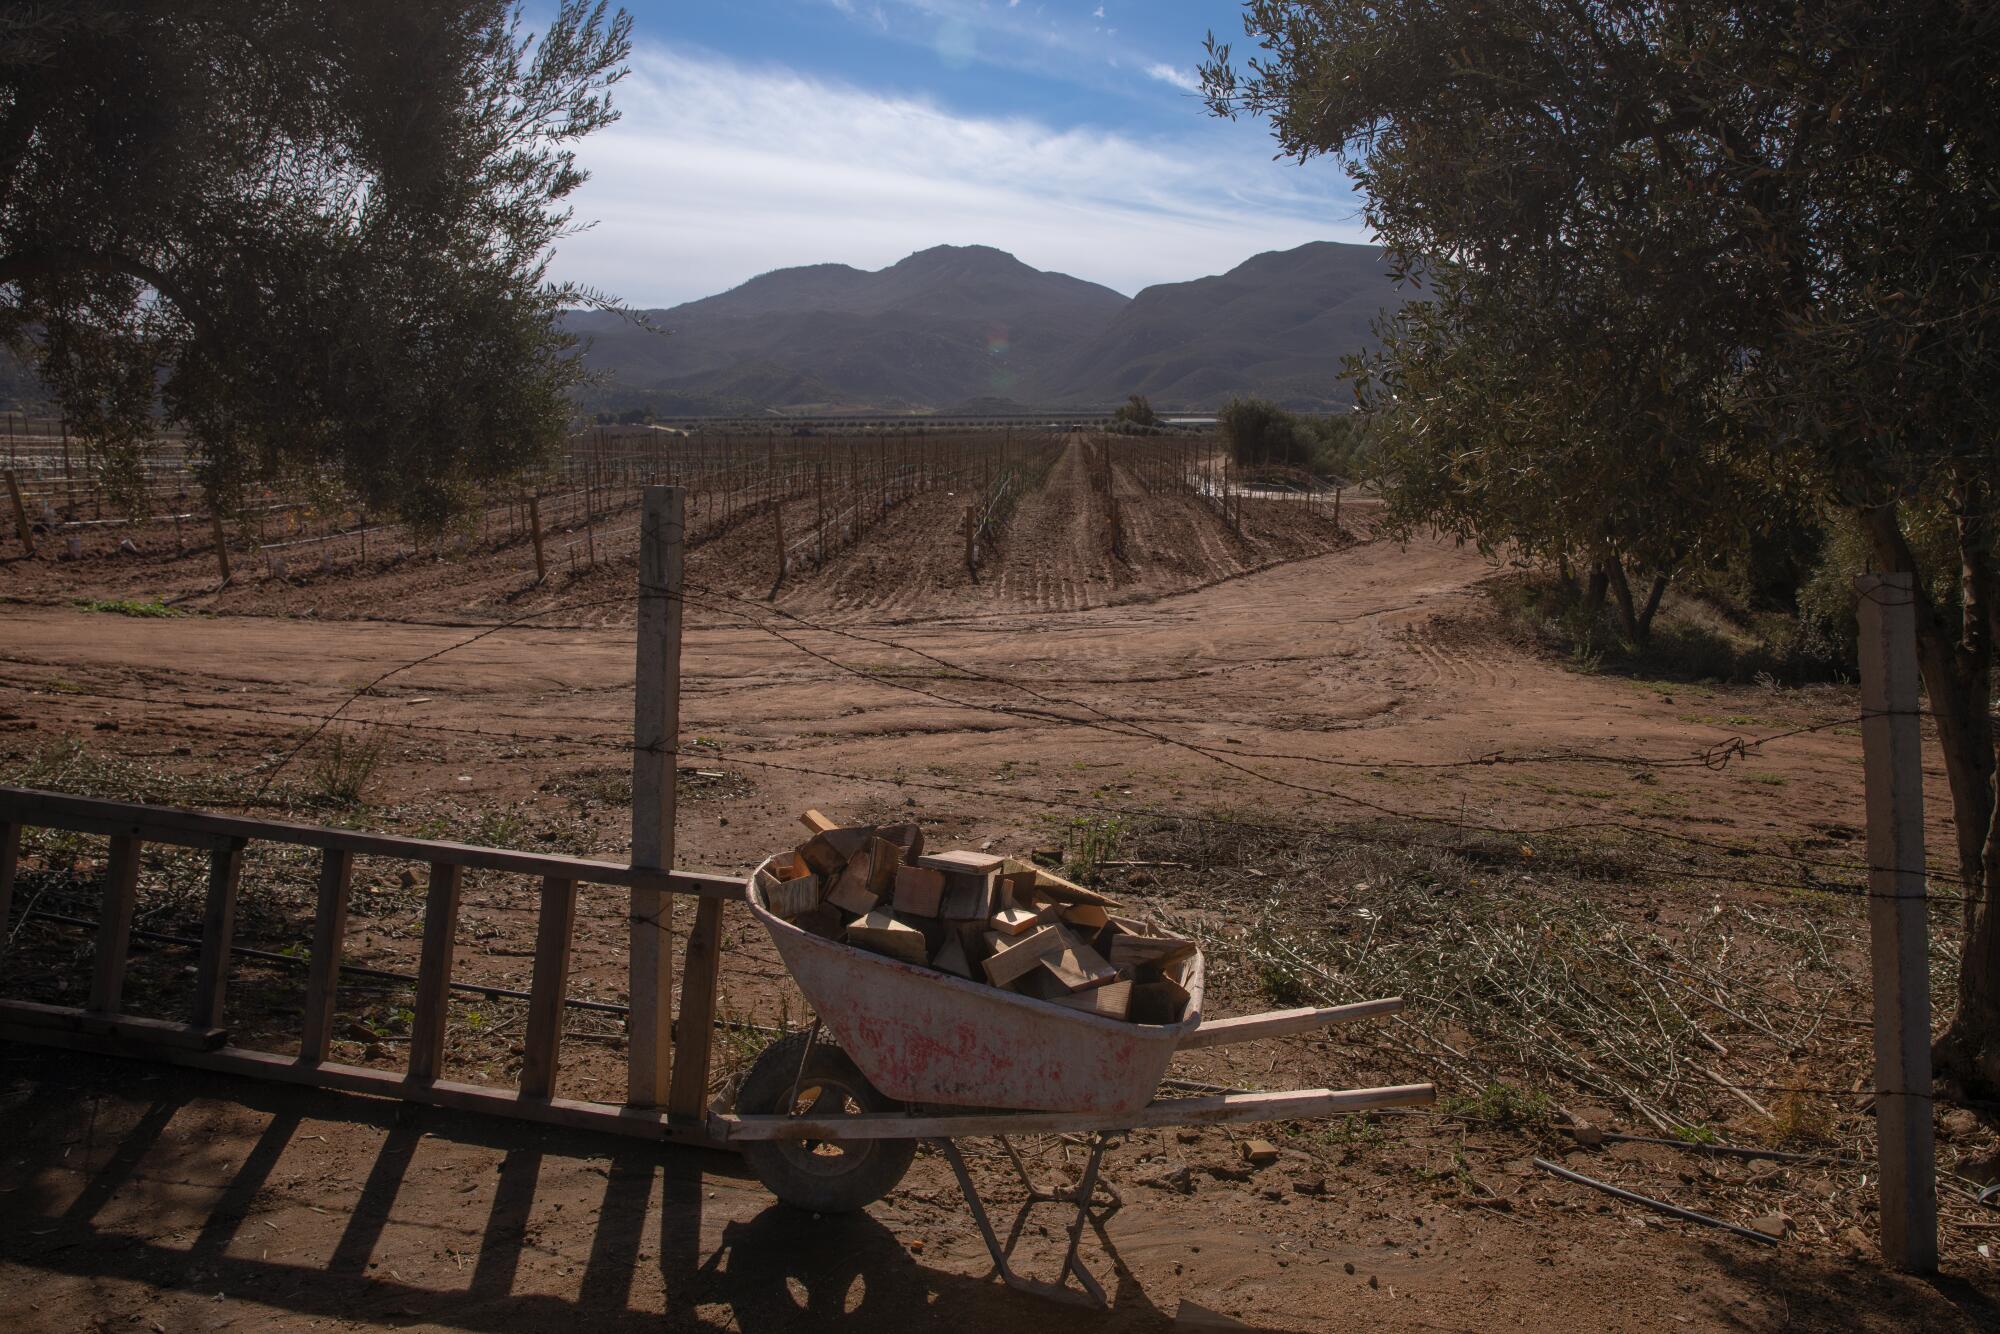 A wheelbarrow loaded with firewood alongside some vineyards, with a distant mountain range in the background.